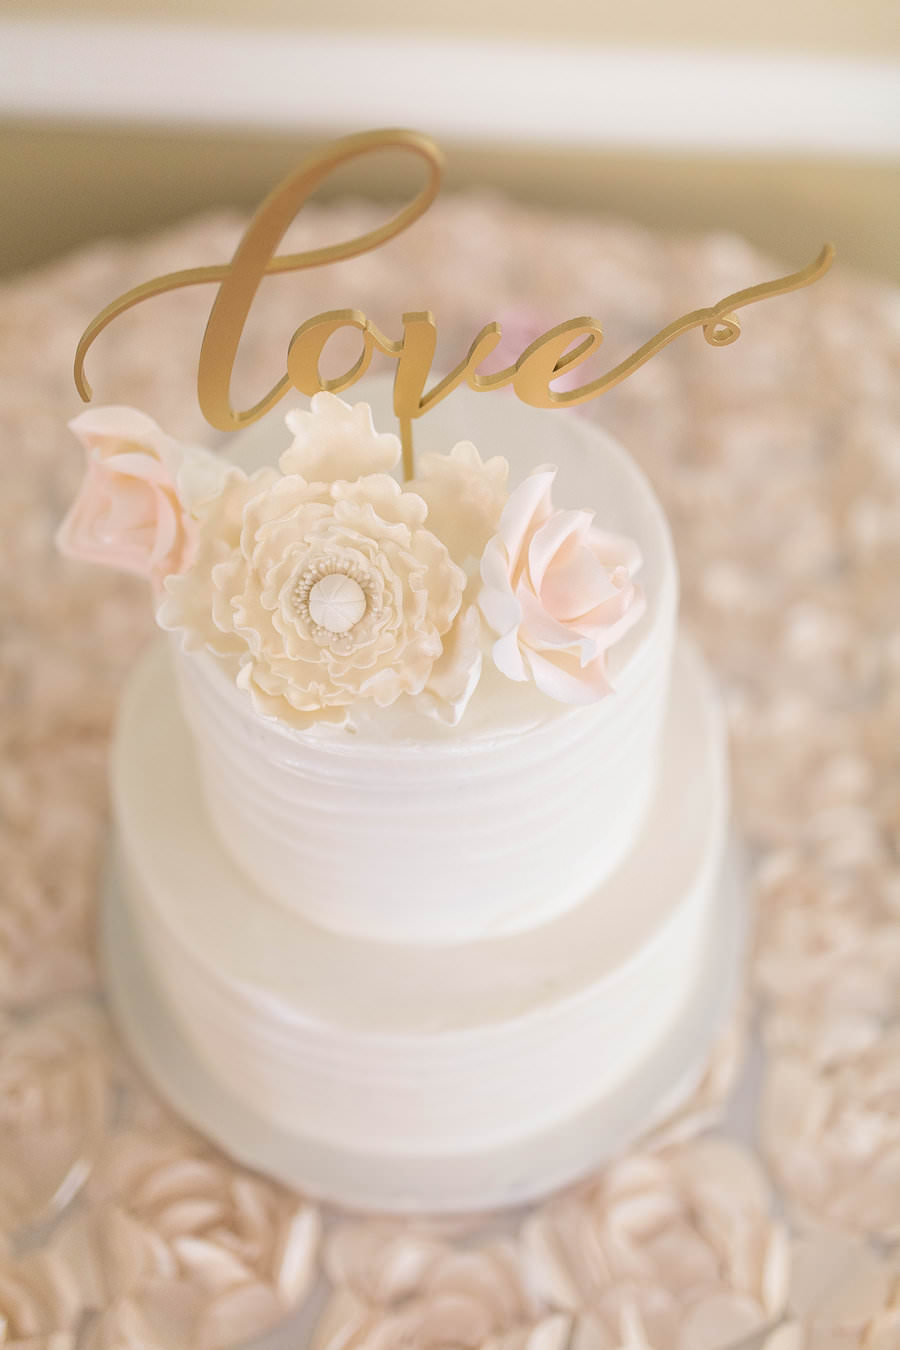 Two Tiered, Round, White Wedding Cake with Gold Love Cake Topper | Tampa Bay Wedding Cake Baker Olympia Catering